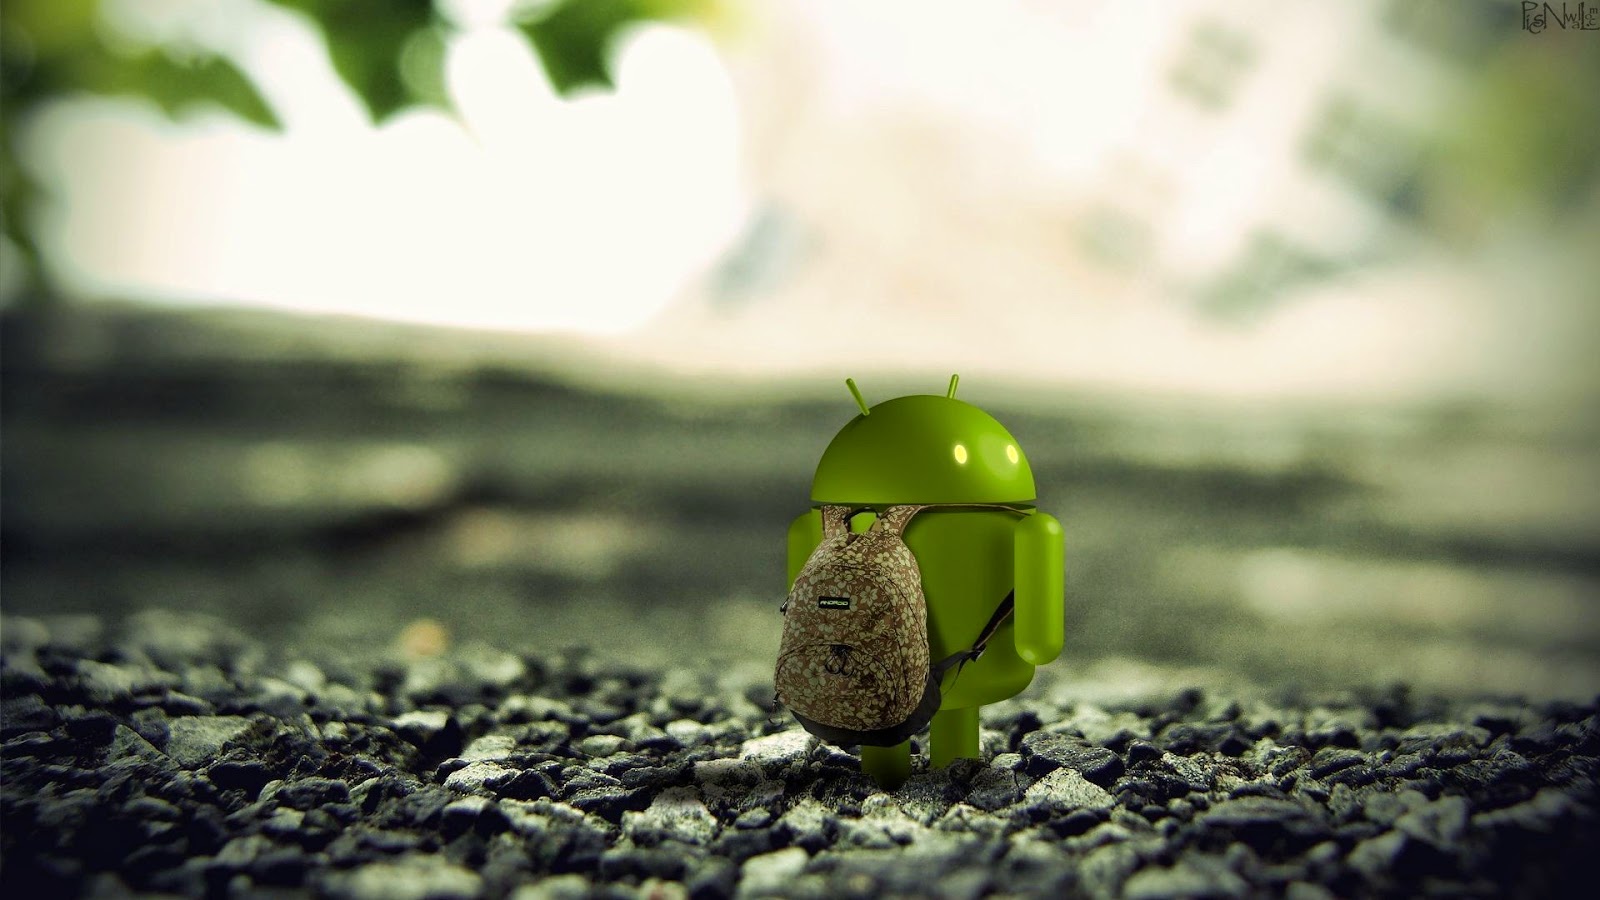 android wallpaper download